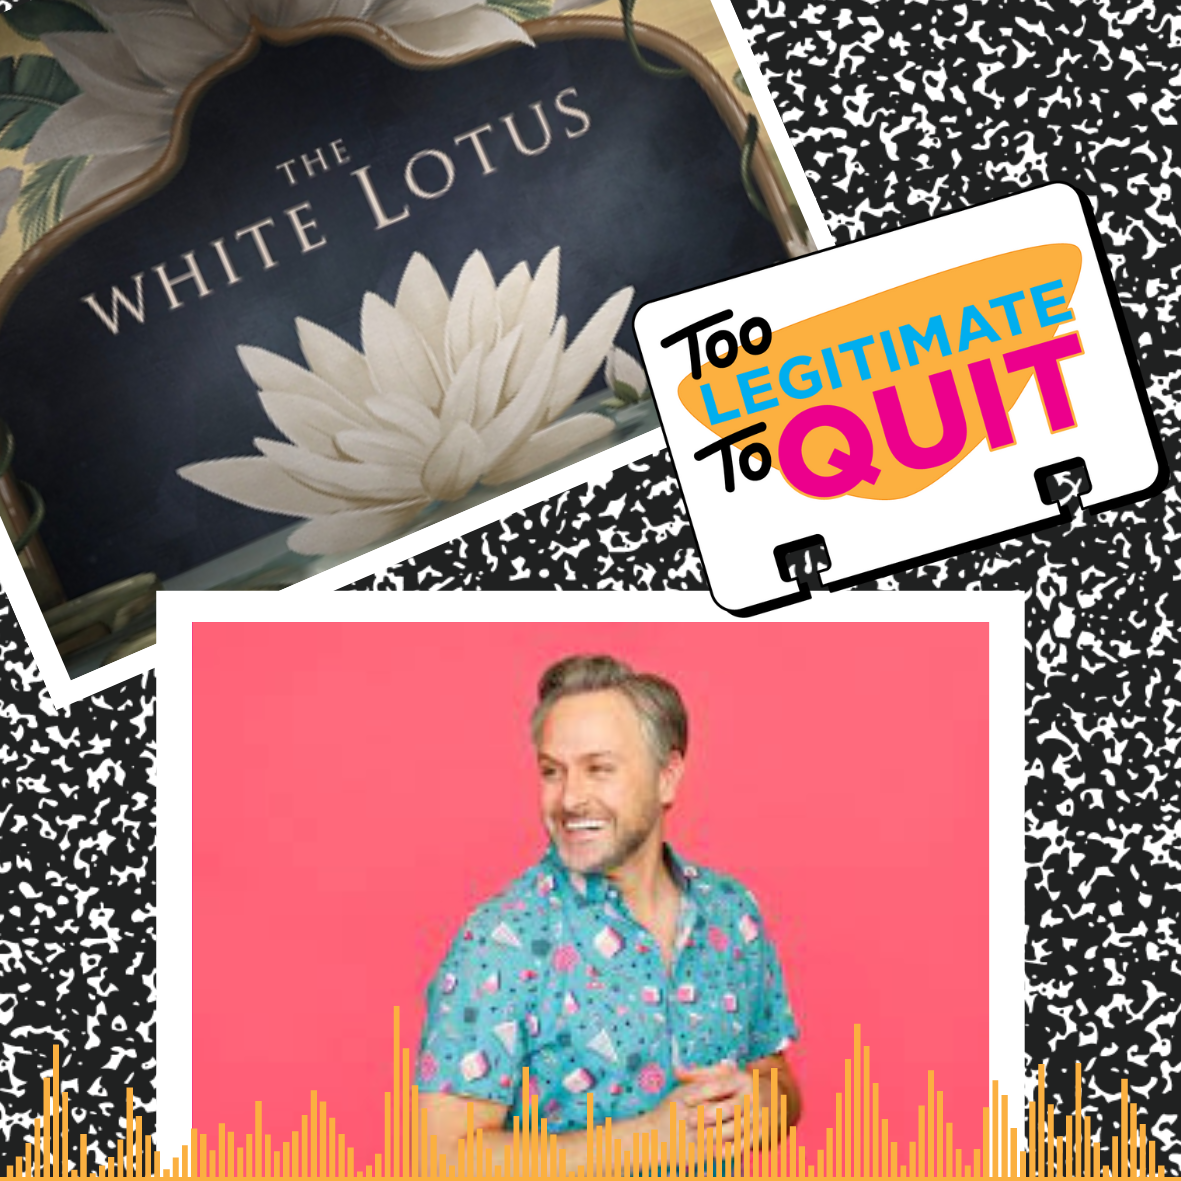 104: On Values, Adaptability & The White Lotus (feat. Brian Patacca)